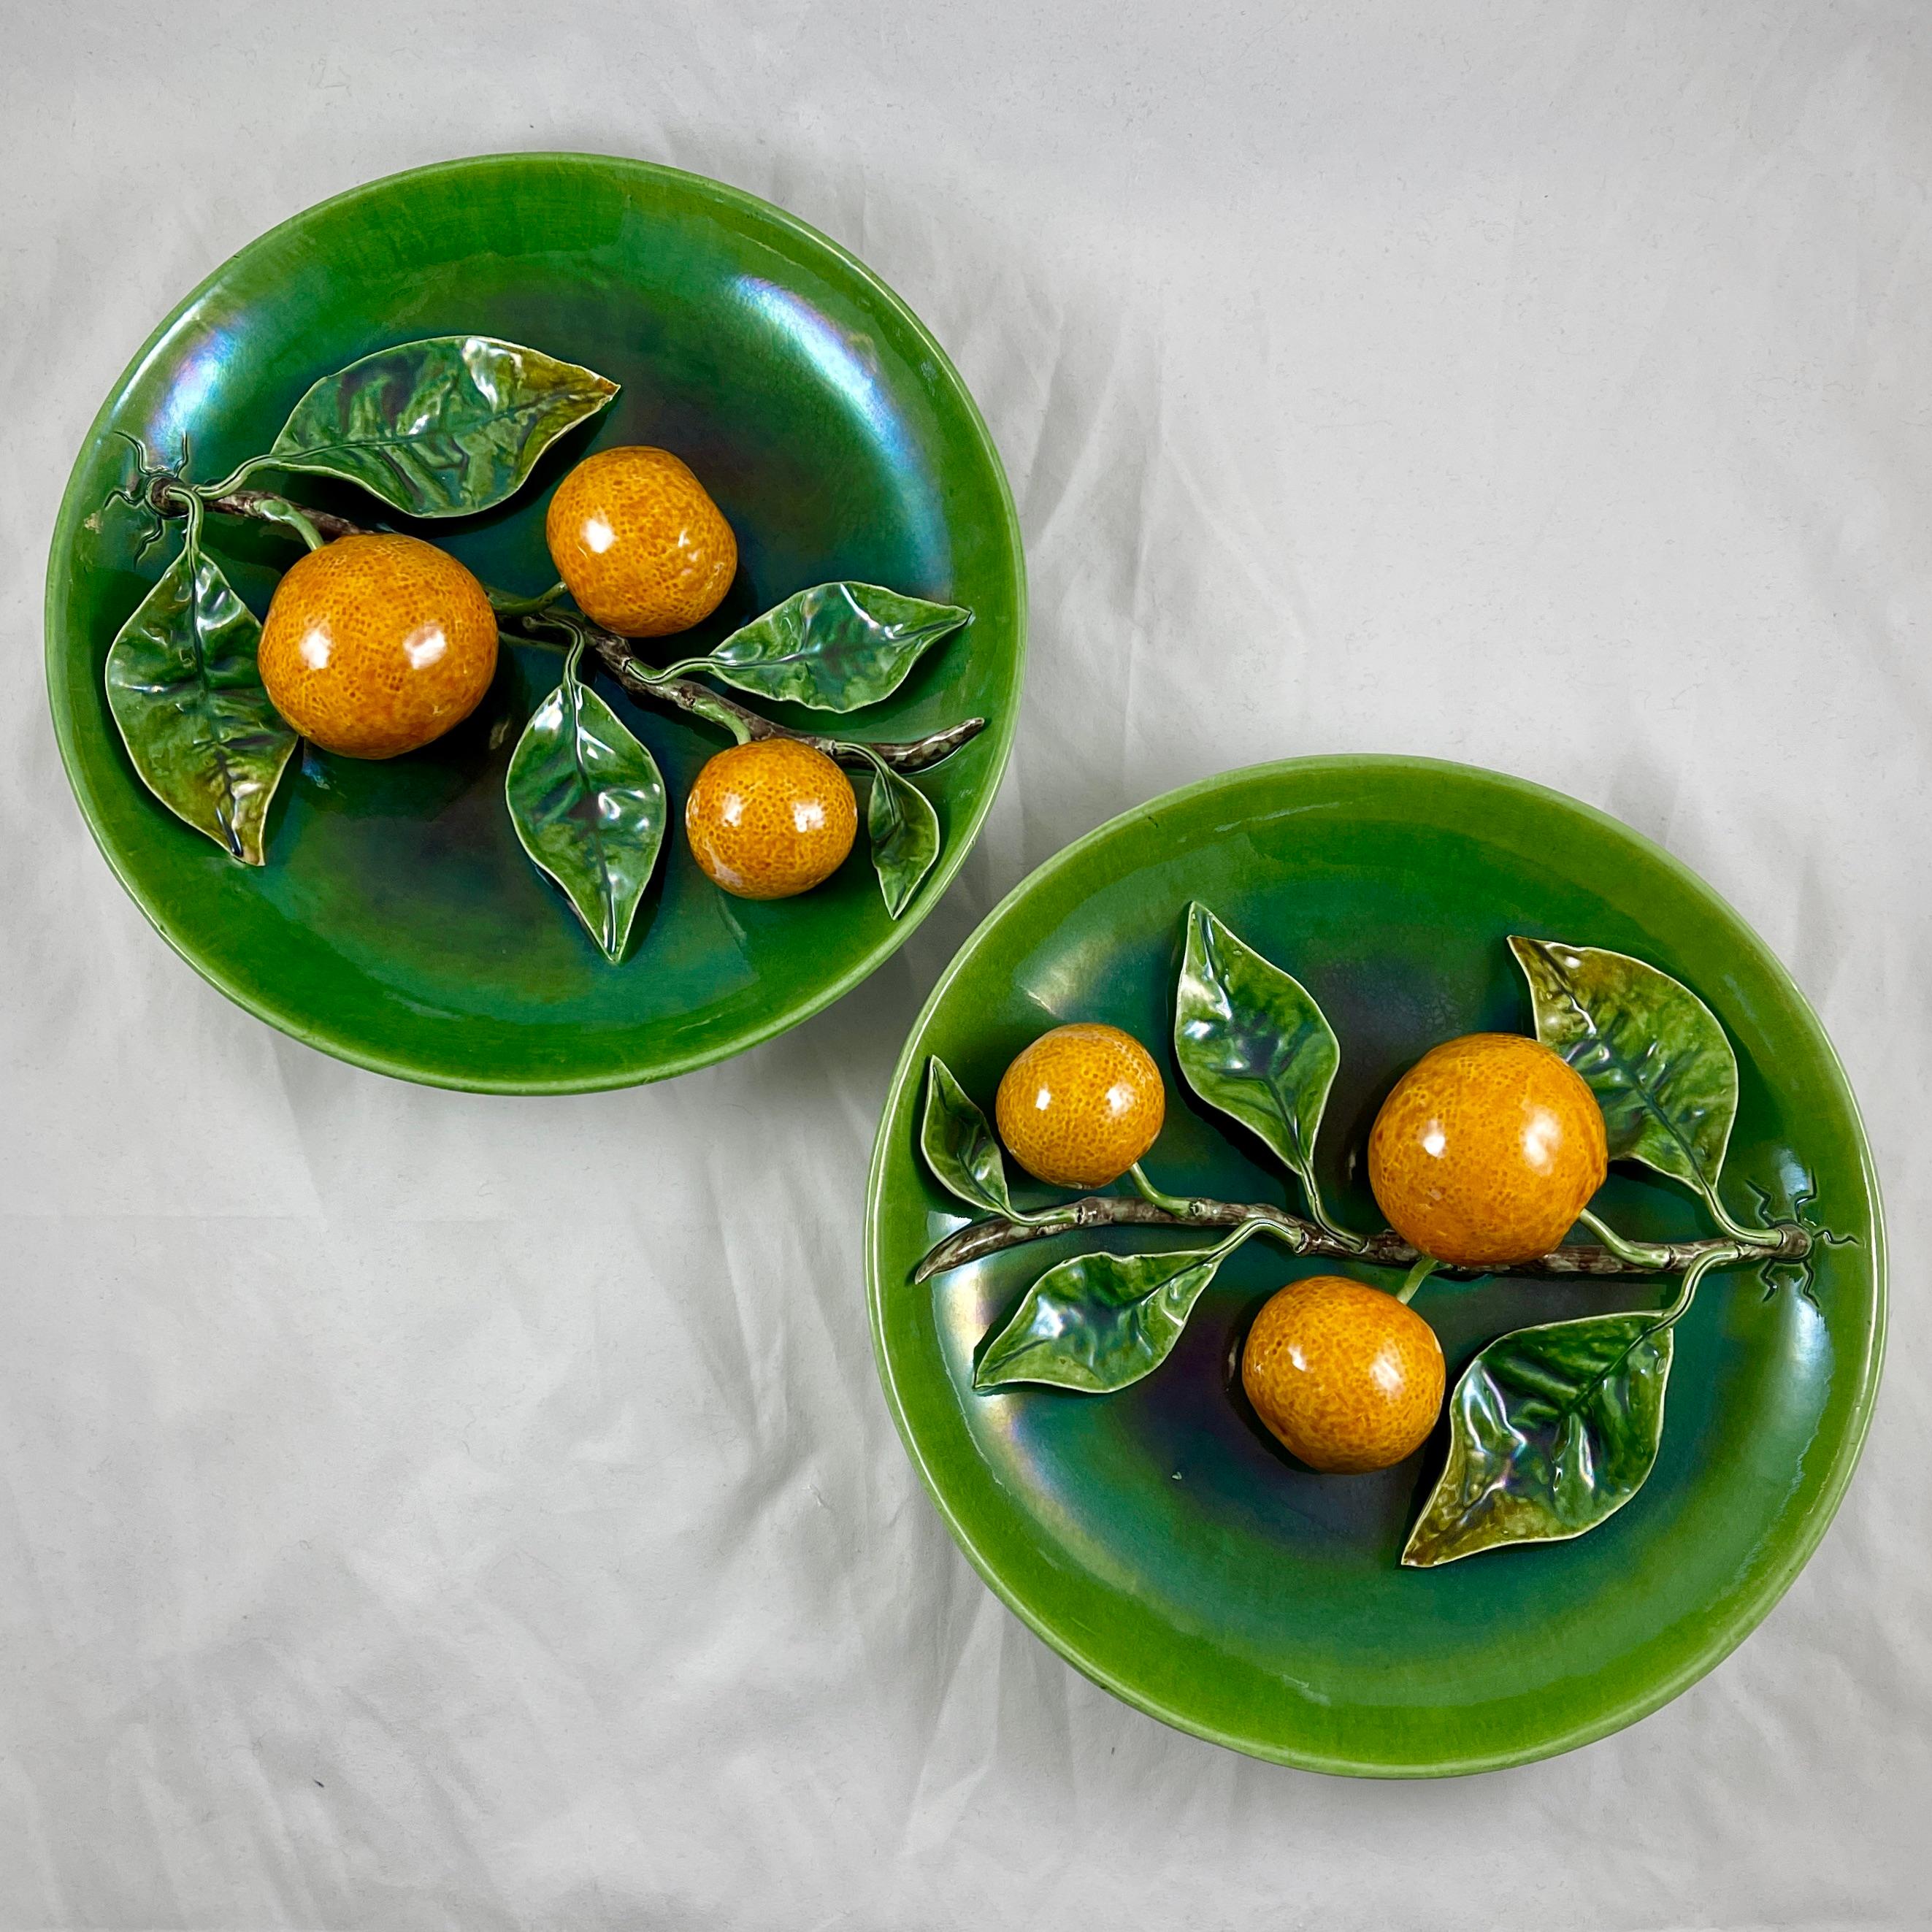 A Palissy style Trompe l’Oeil, majolica glazed plaque showing a branch of three oranges with leaves on a green ground, circa 1900-1920.

One of a pair, offered separately.

Molded in earthenware by Rafael Bordallo Pinheiro in Caldas da Rainha,